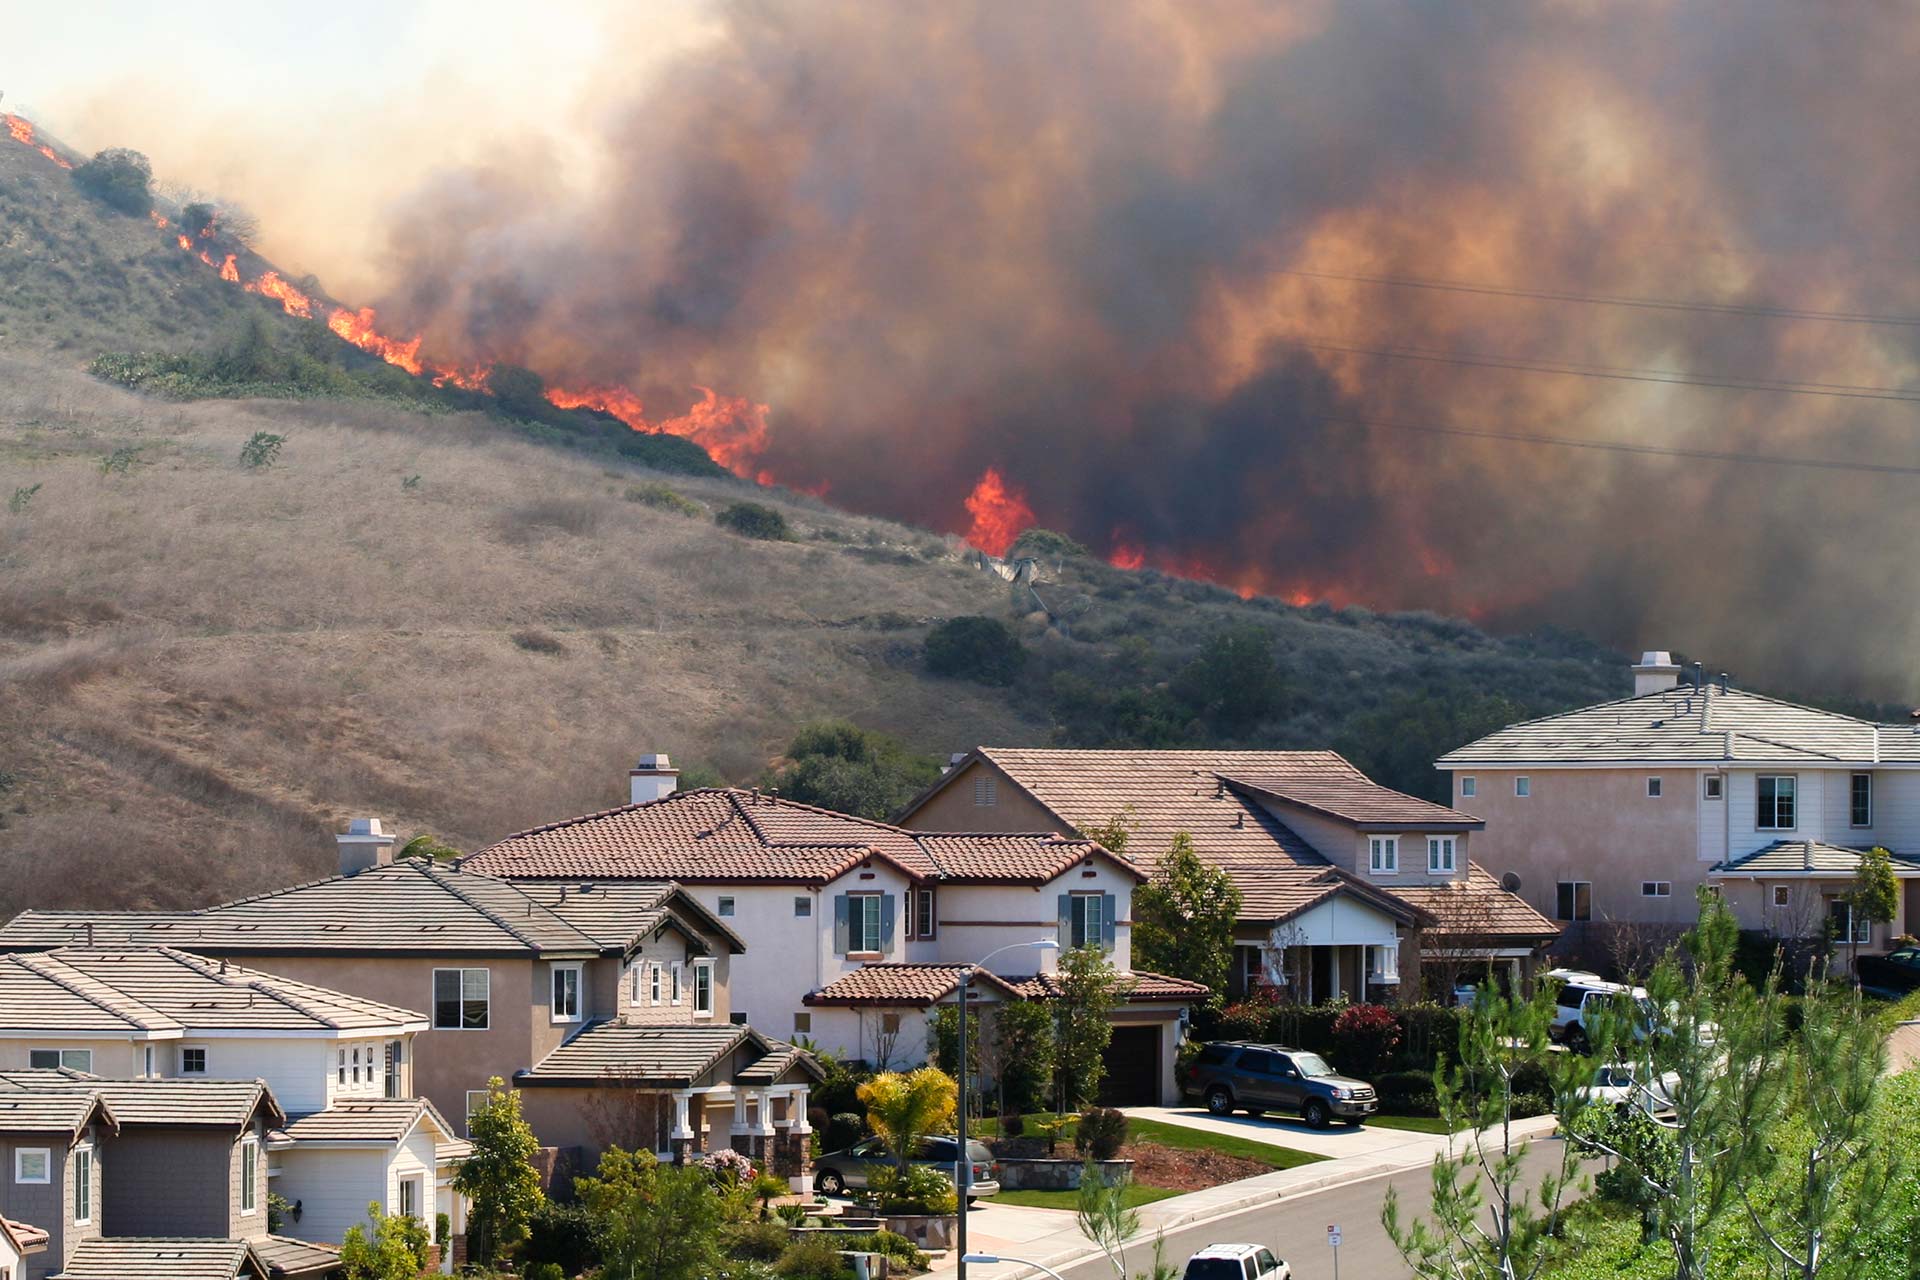 Land Use Planning More Effective Than Logging to Reduce Wildfire Risk